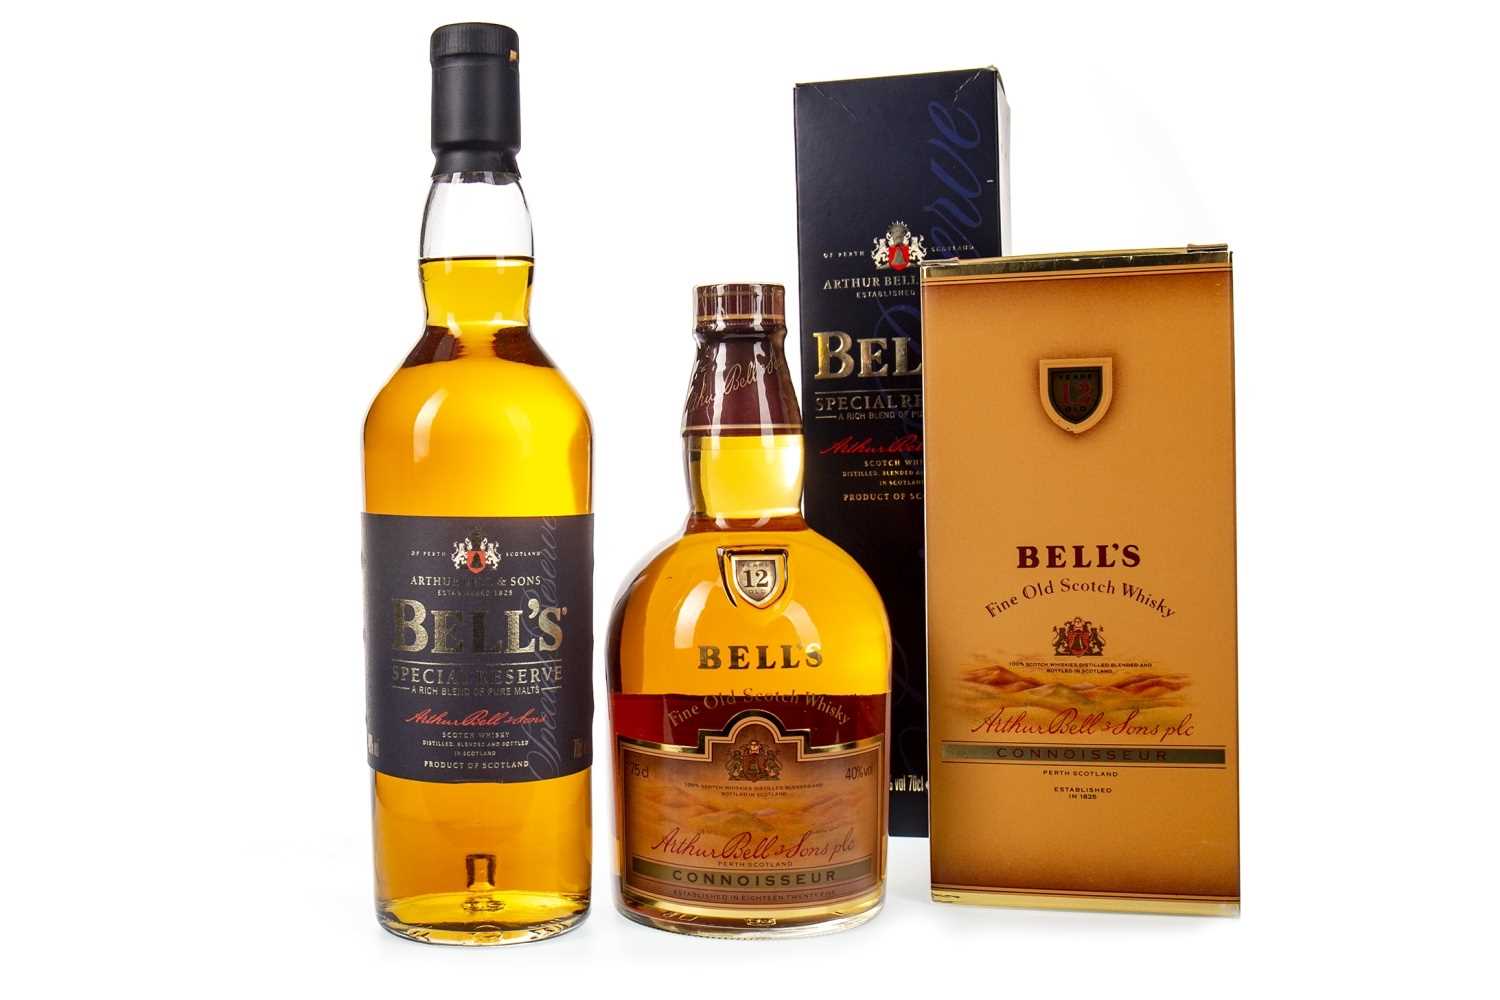 Lot 430 - BELL'S CONNOISSEUR 12 YEARS OLD AND BELL'S SPECIAL RESERVE